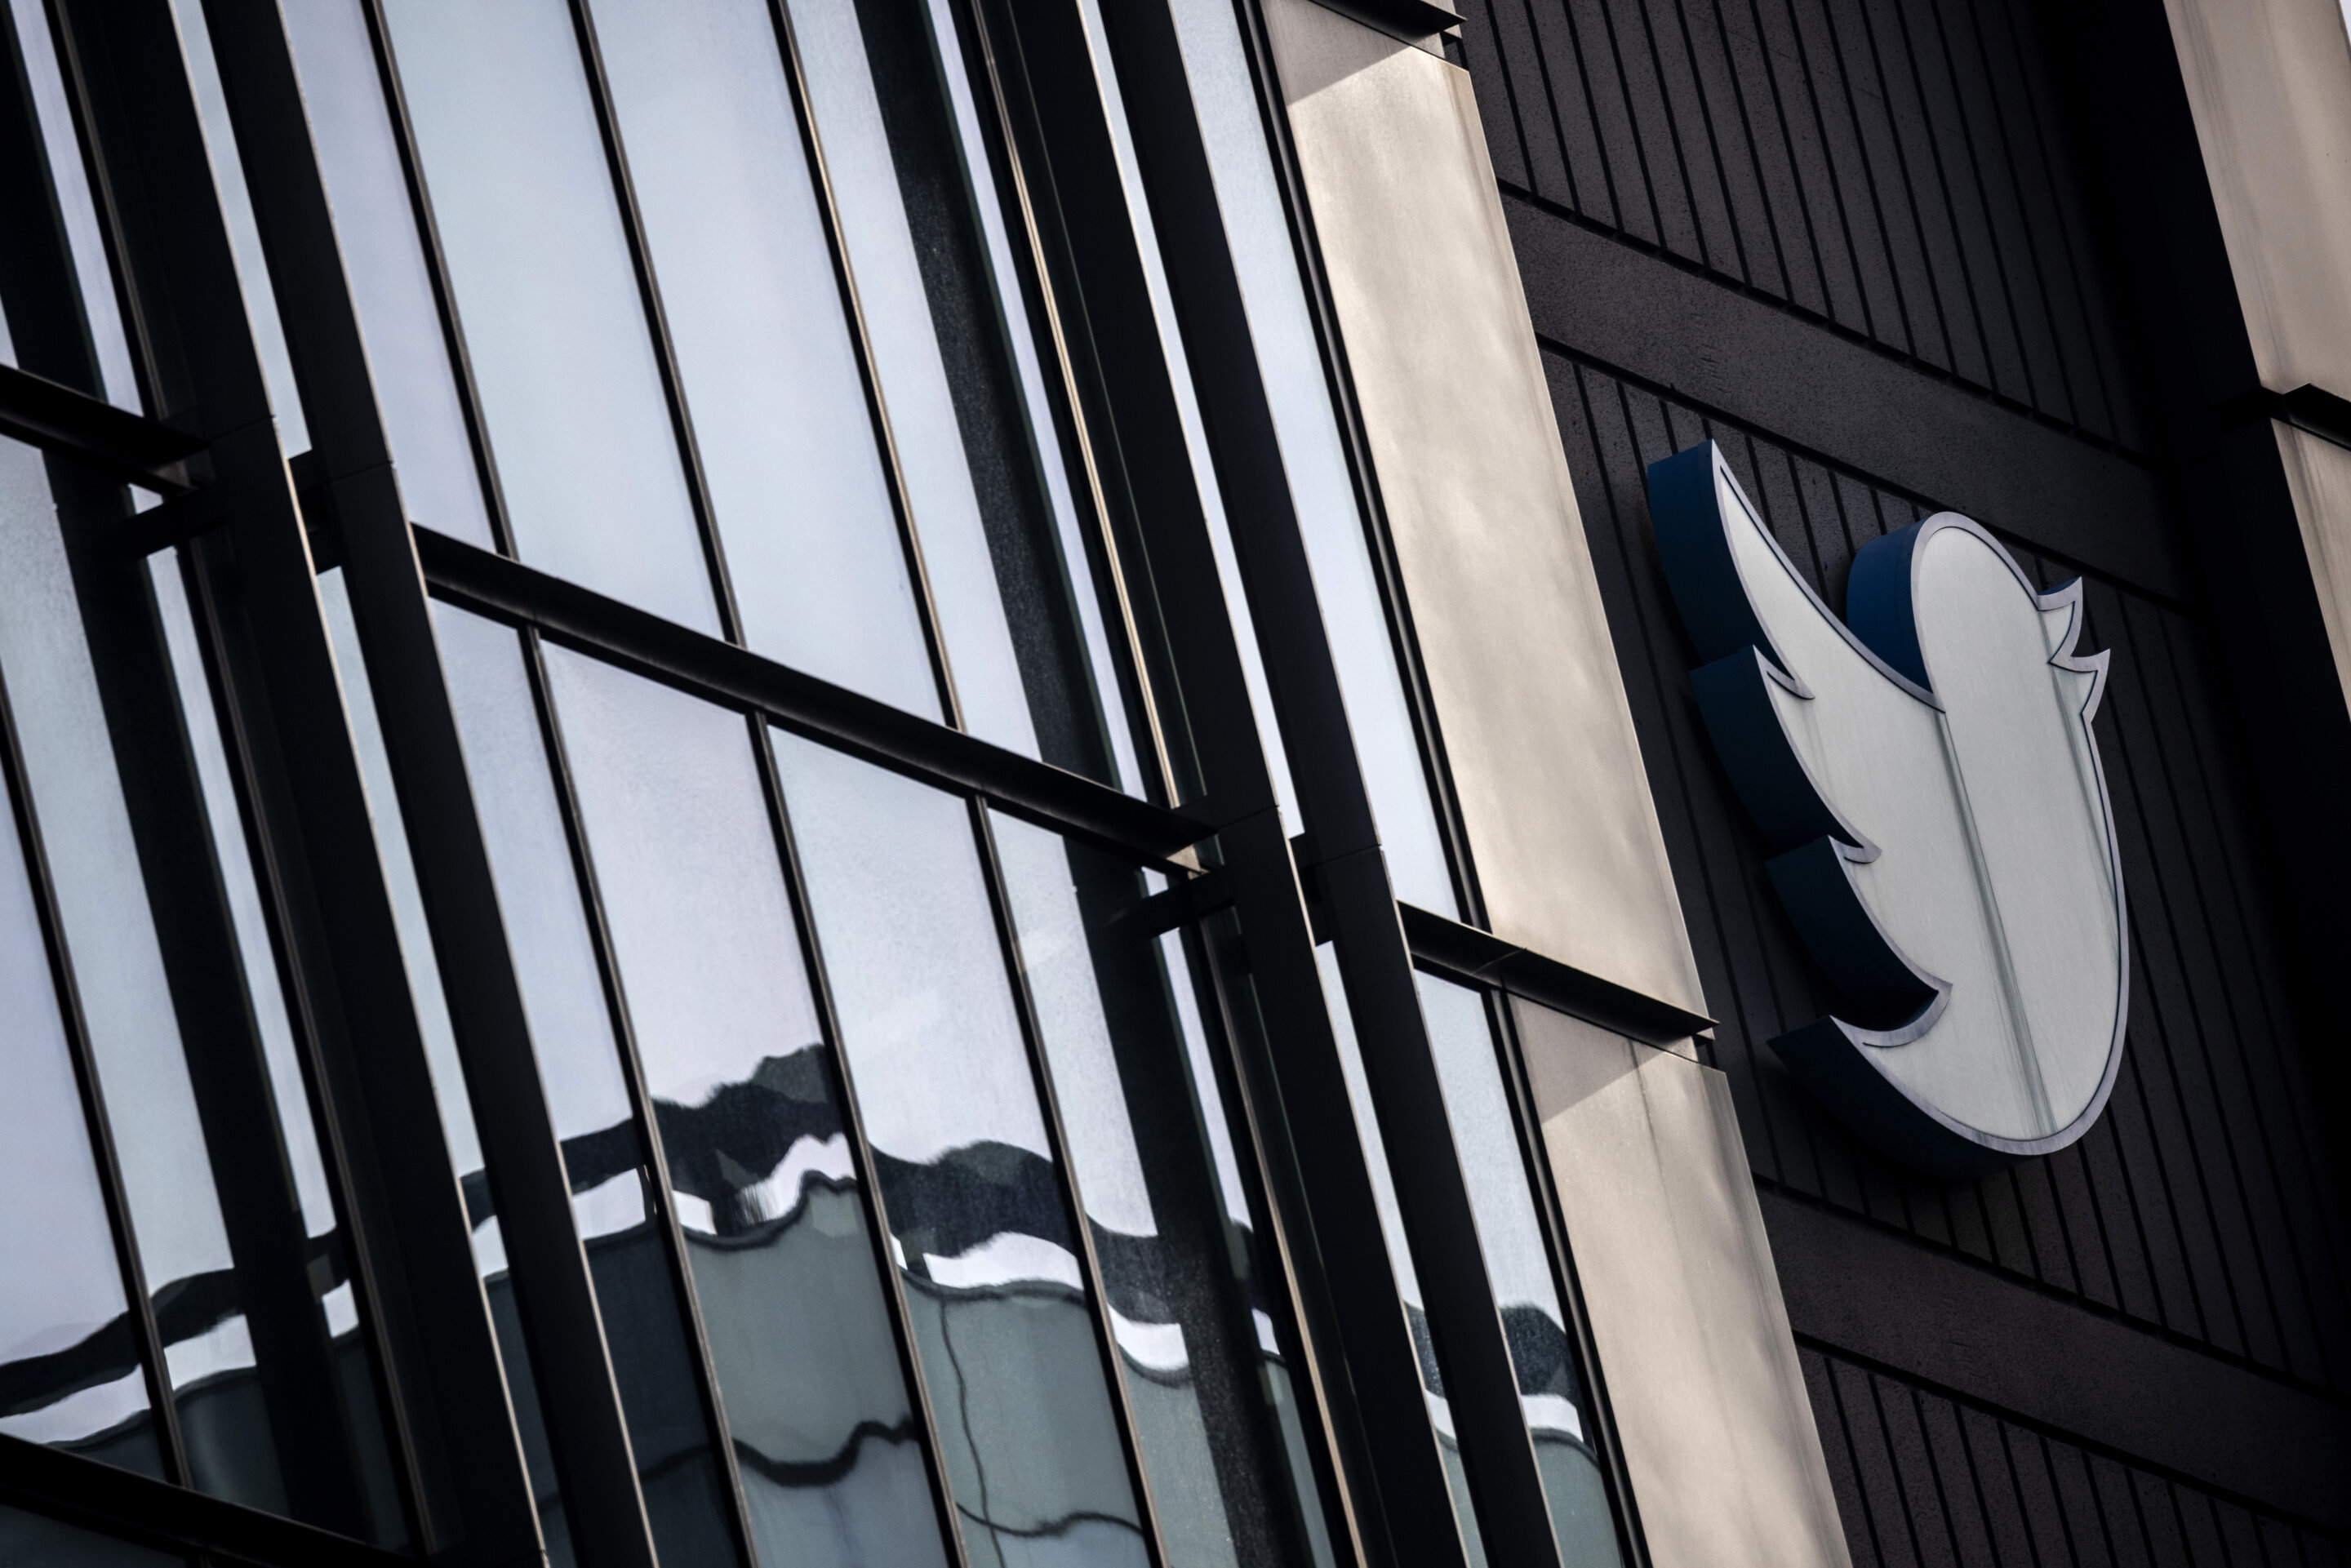 With Twitter in chaos, some ways to protect your account